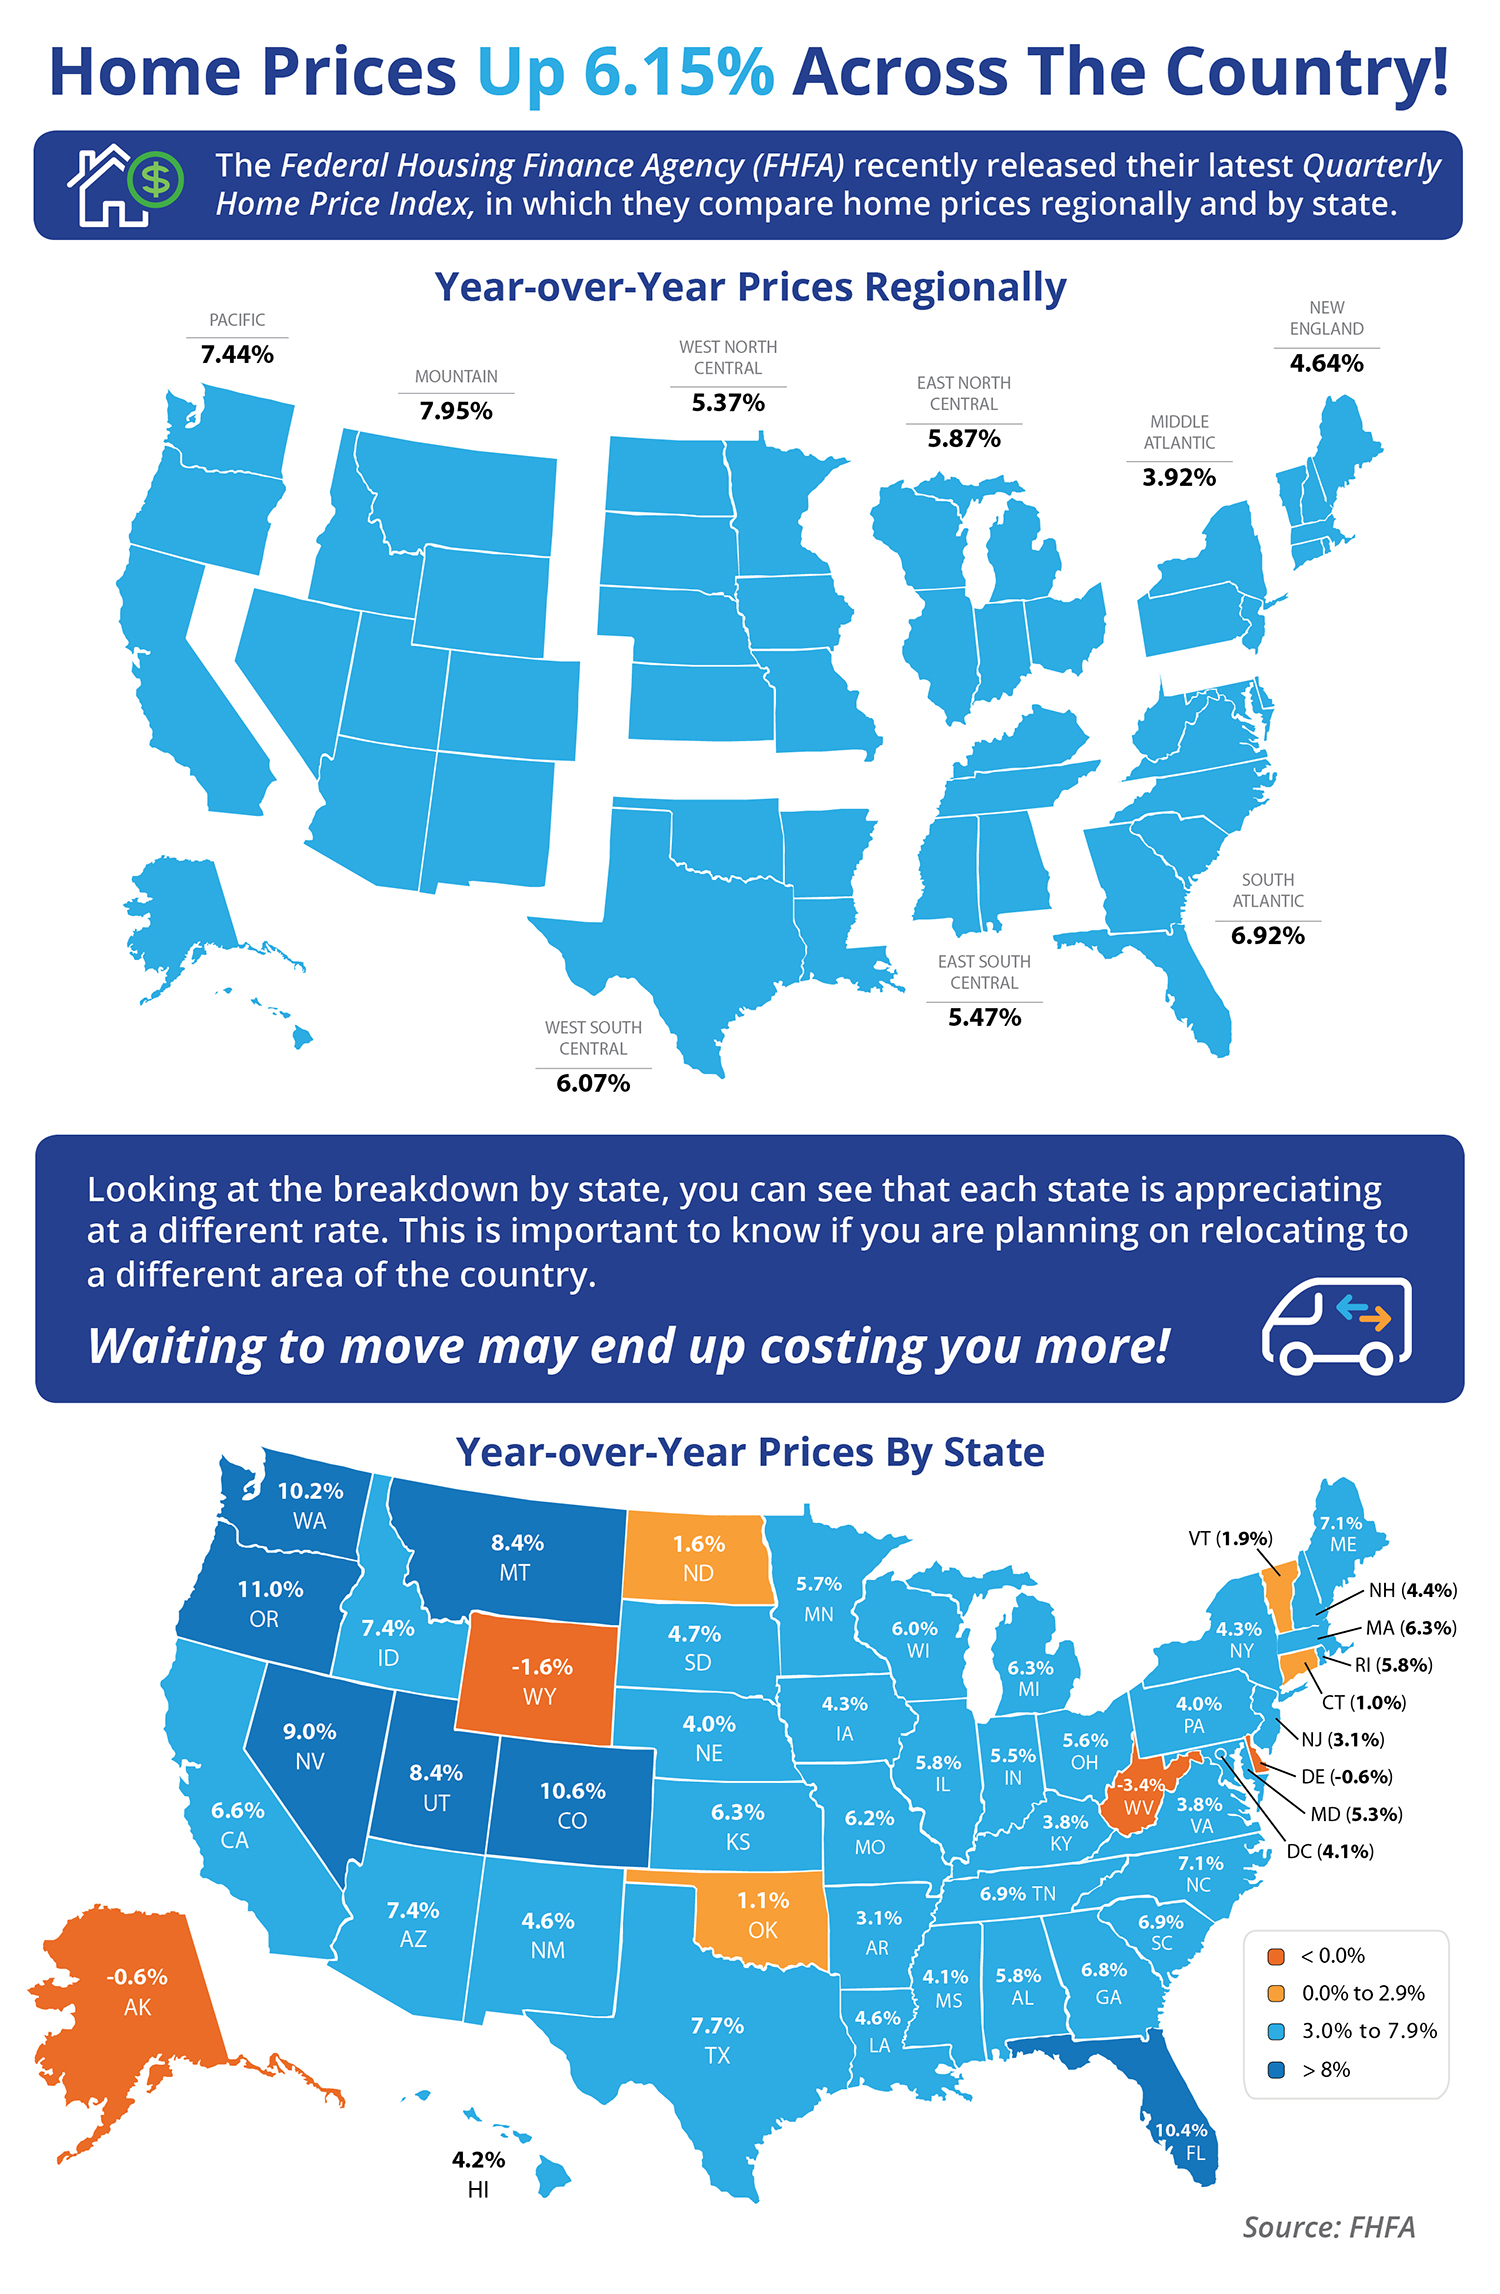 Home Prices Up 6.15% Across the Country! [INFOGRAPHIC] | Simplifying The Market